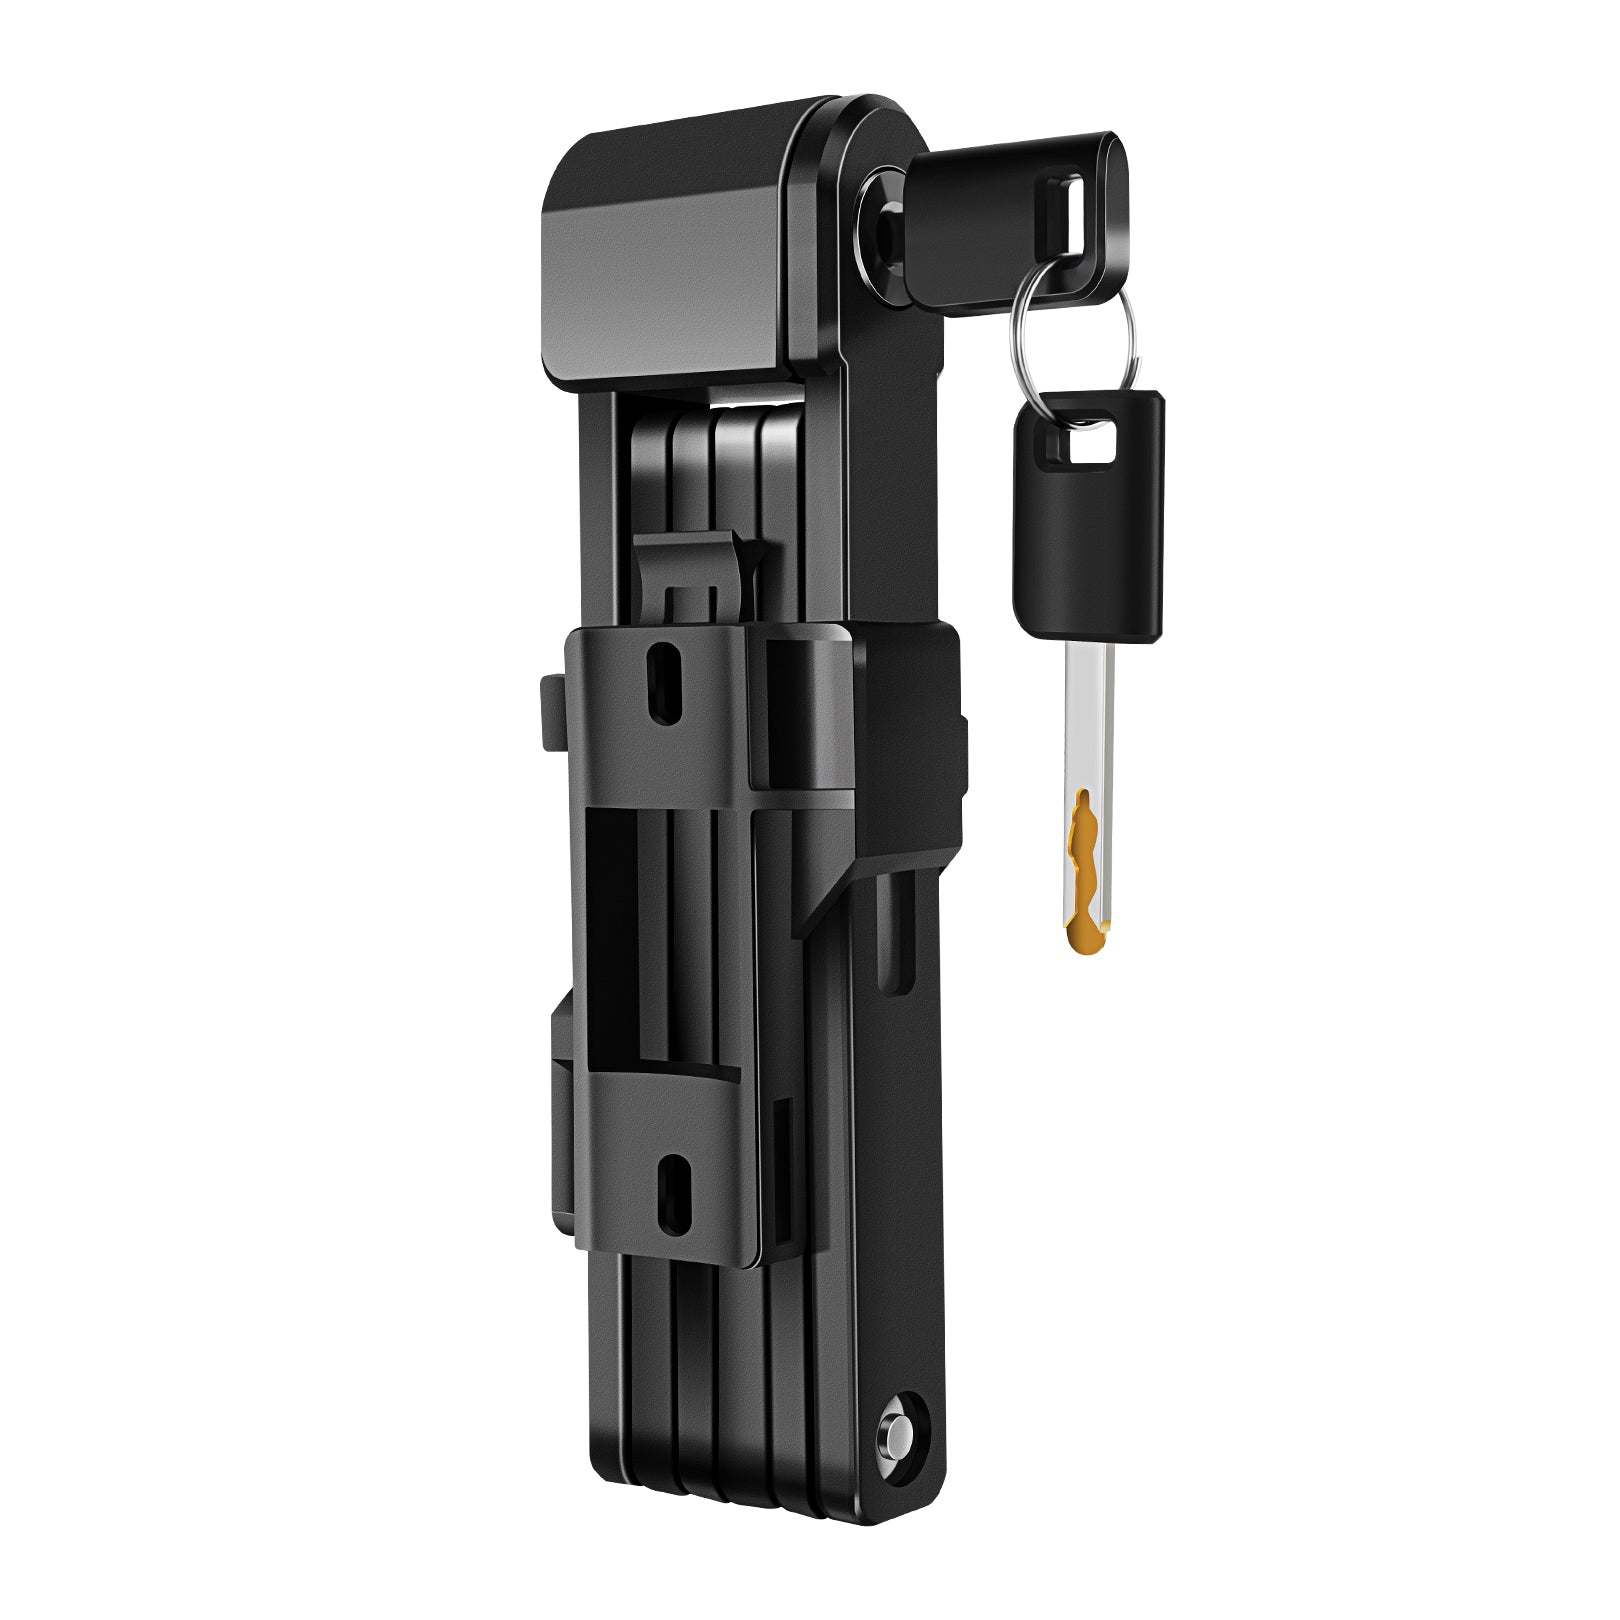 The E-Bike Folding Lock, made from sturdy and durable materials, effectively prevents theft. This multifunctional lock is perfect for ensuring your bike's security. With over 100 offline repair stores and comprehensive return and exchange services, Vanpowers ensures a hassle-free experience.